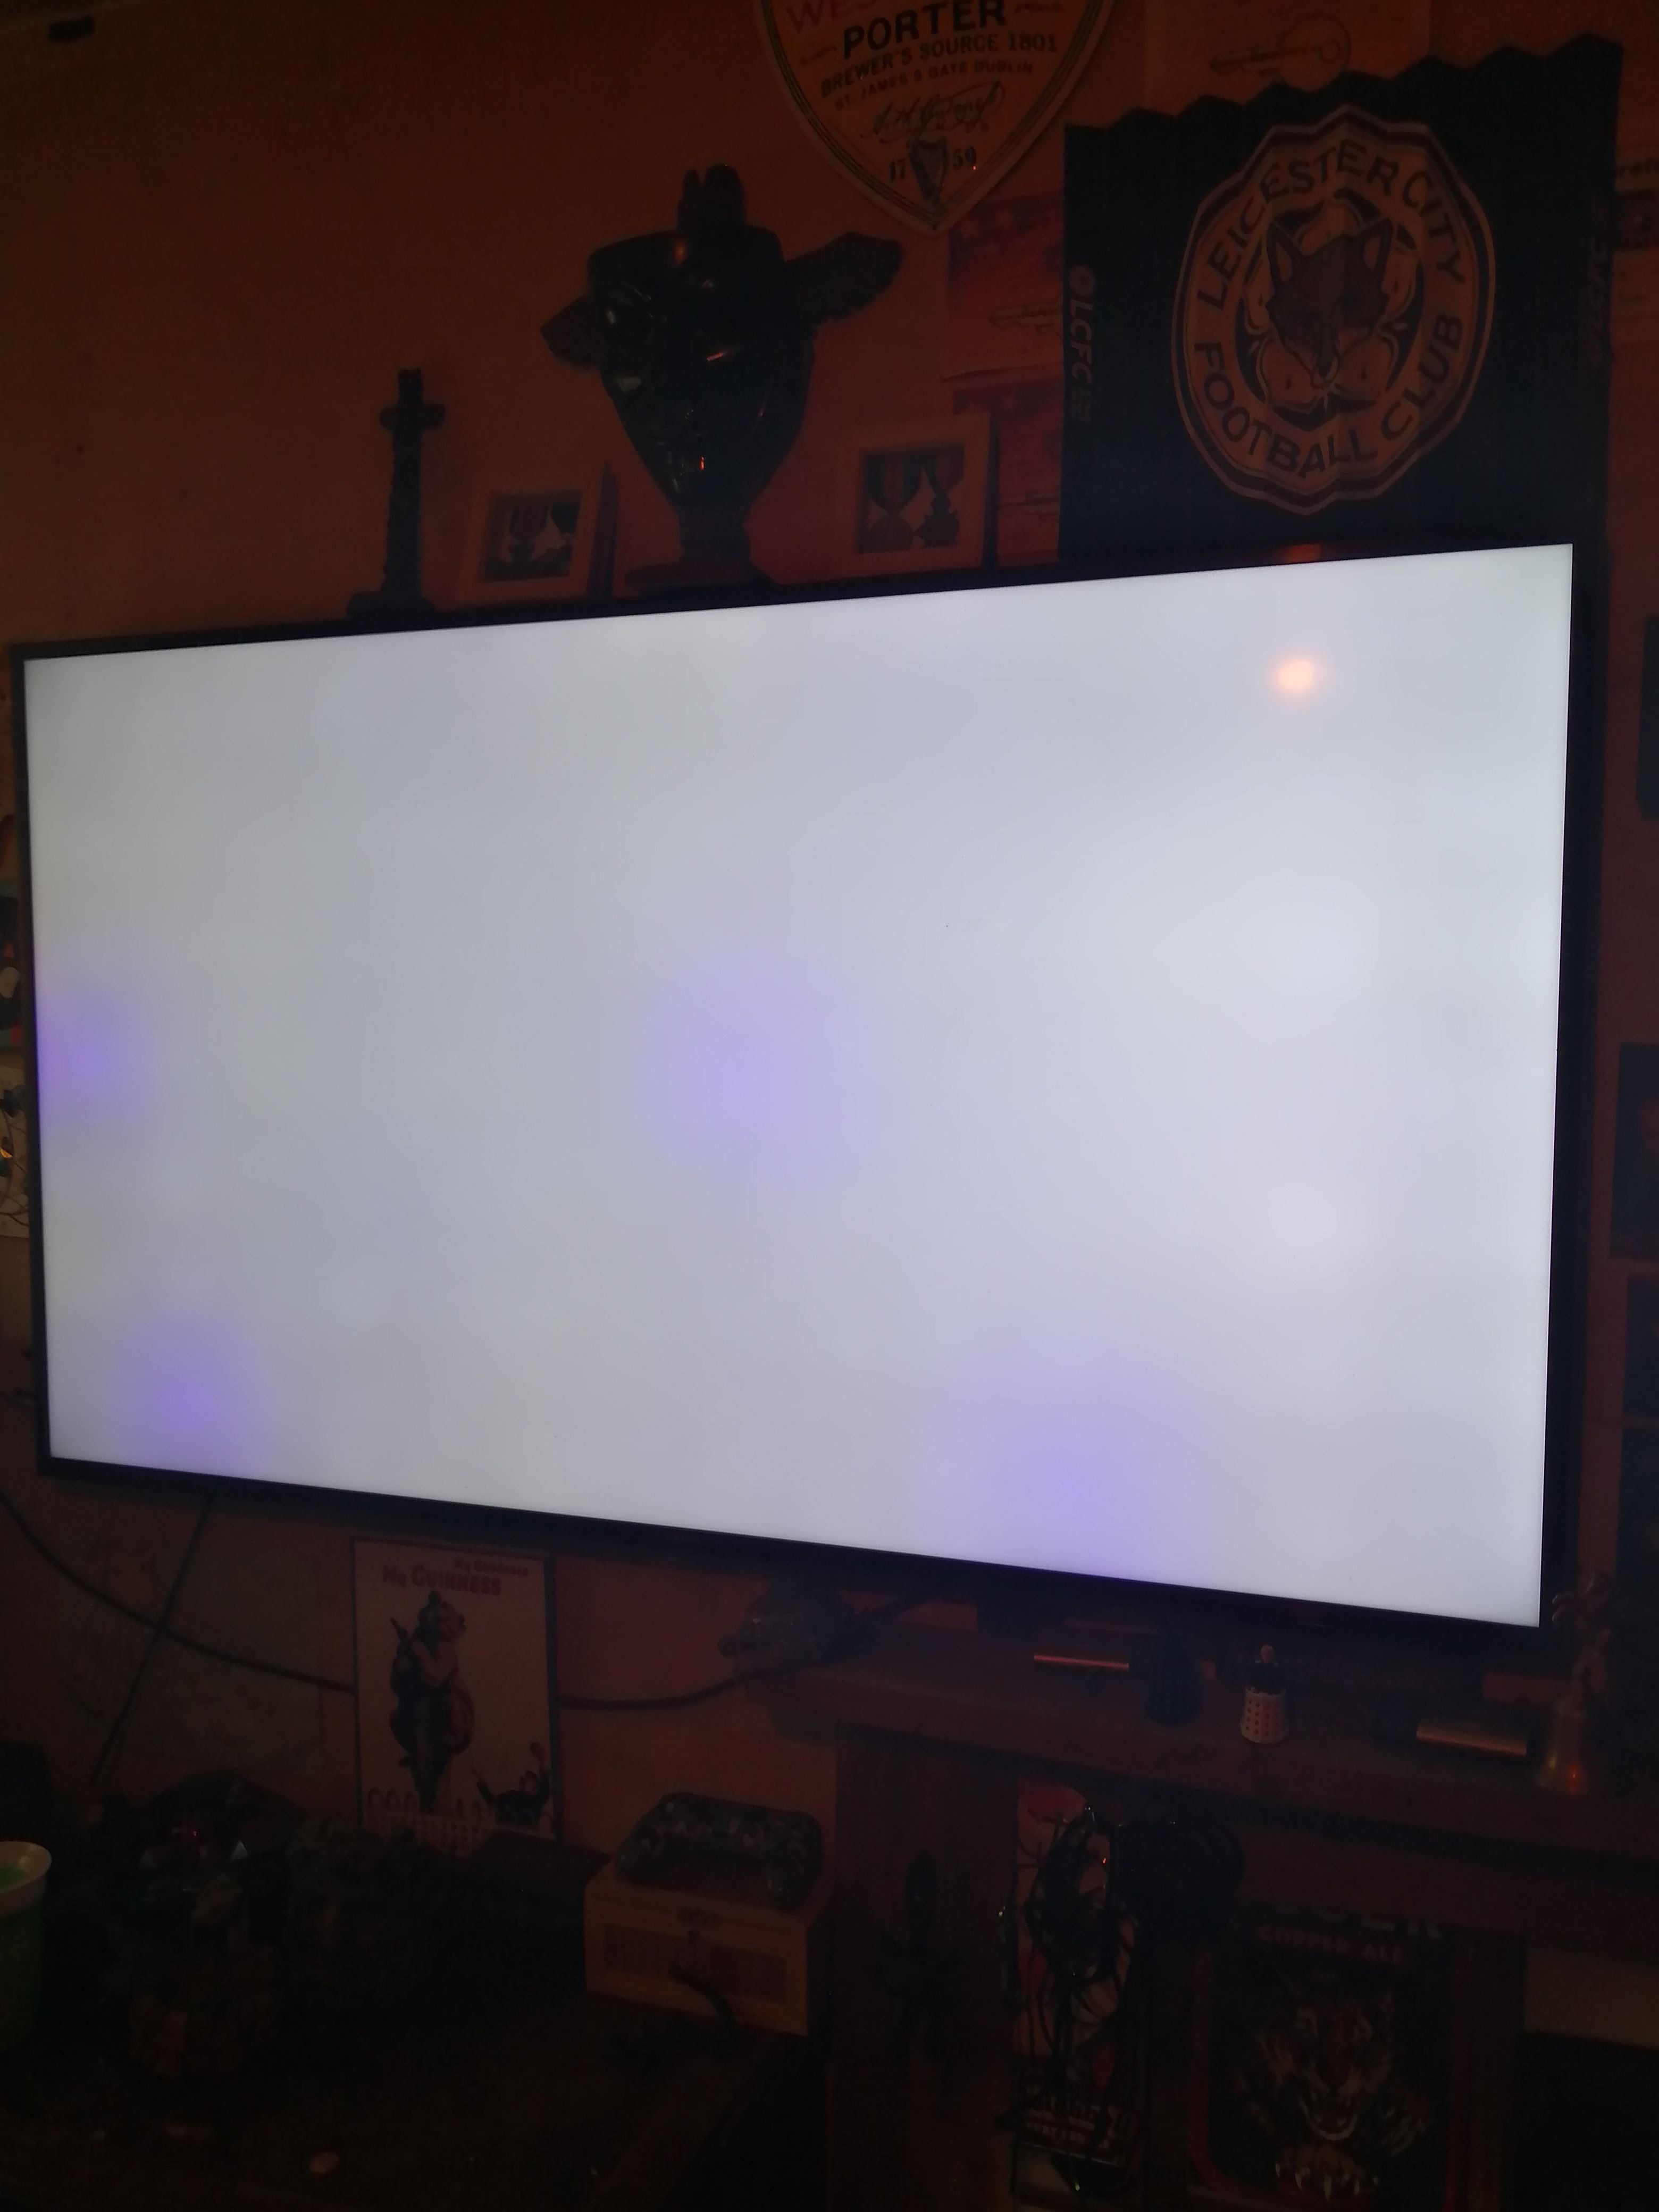 Purple patches on TV - Page 2 - Samsung Community